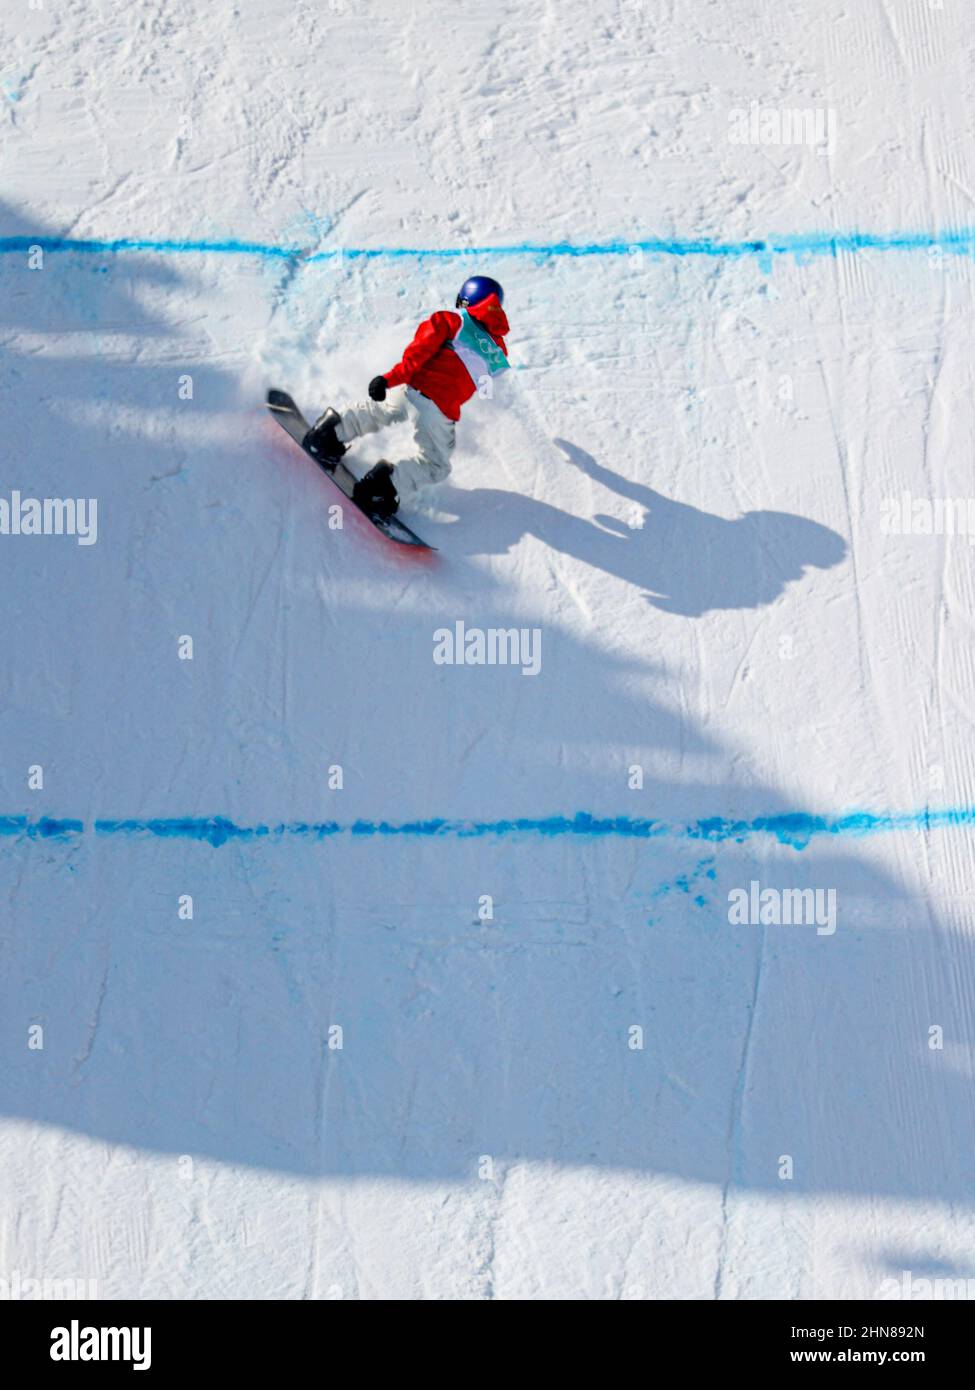 SHIJINGSHAN, CHINA - FEBRUARY 15: Takeru Otsuka of Japan competing at the Big Air Final during the Beijing 2022 Olympic Games at the Big Air Shougang on February 15, 2022 in Shijingshan, China (Photo by Iris van den Broek/Orange Pictures) NOCNSF Stock Photo